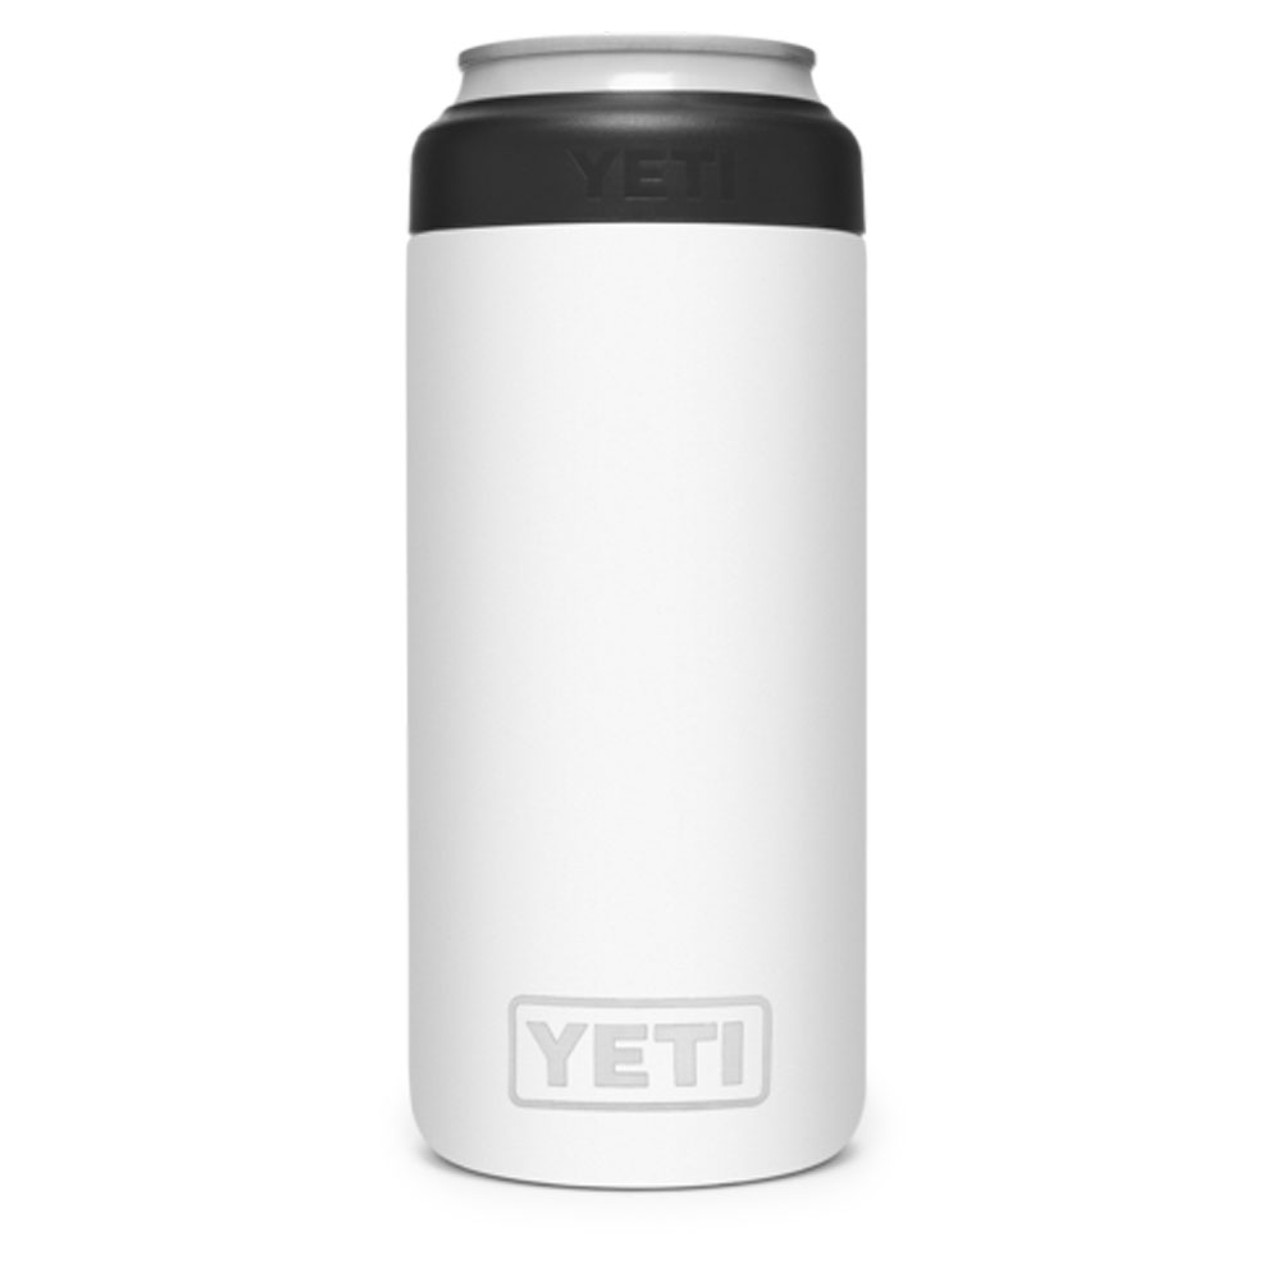 https://cdn11.bigcommerce.com/s-zut1msomd6/images/stencil/1280x1280/products/40337/241819/yeti-rambler-12-oz-colster-slim-can-cooler-21070090082-white__65038.1698268924.jpg?c=1